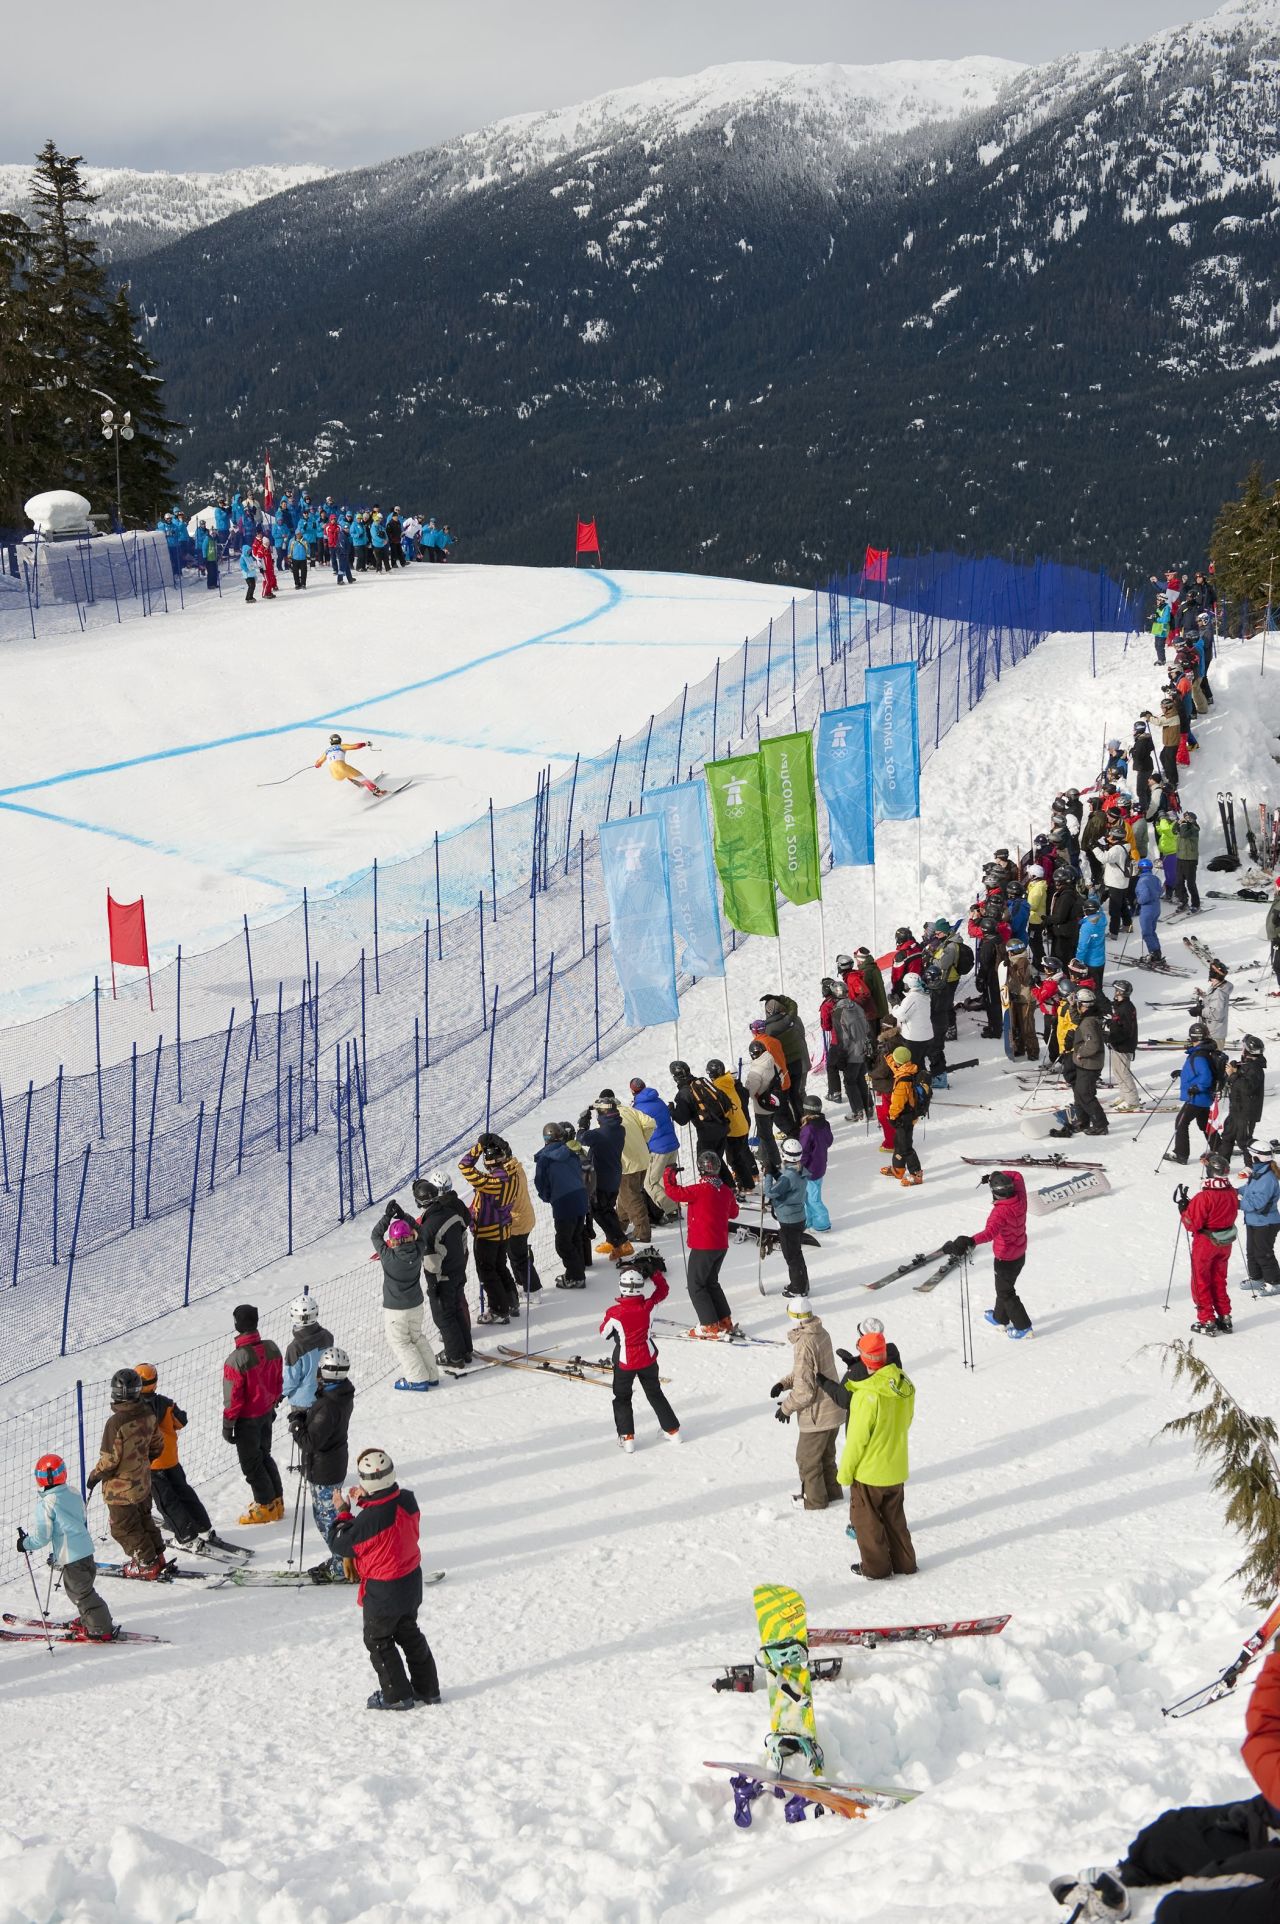 This Olympic run is named after a former Canadian ski team member and Whistler's director of skiing. Various sections include names like Lower Insanity, Toilet Bowl and Boyd's Bump.